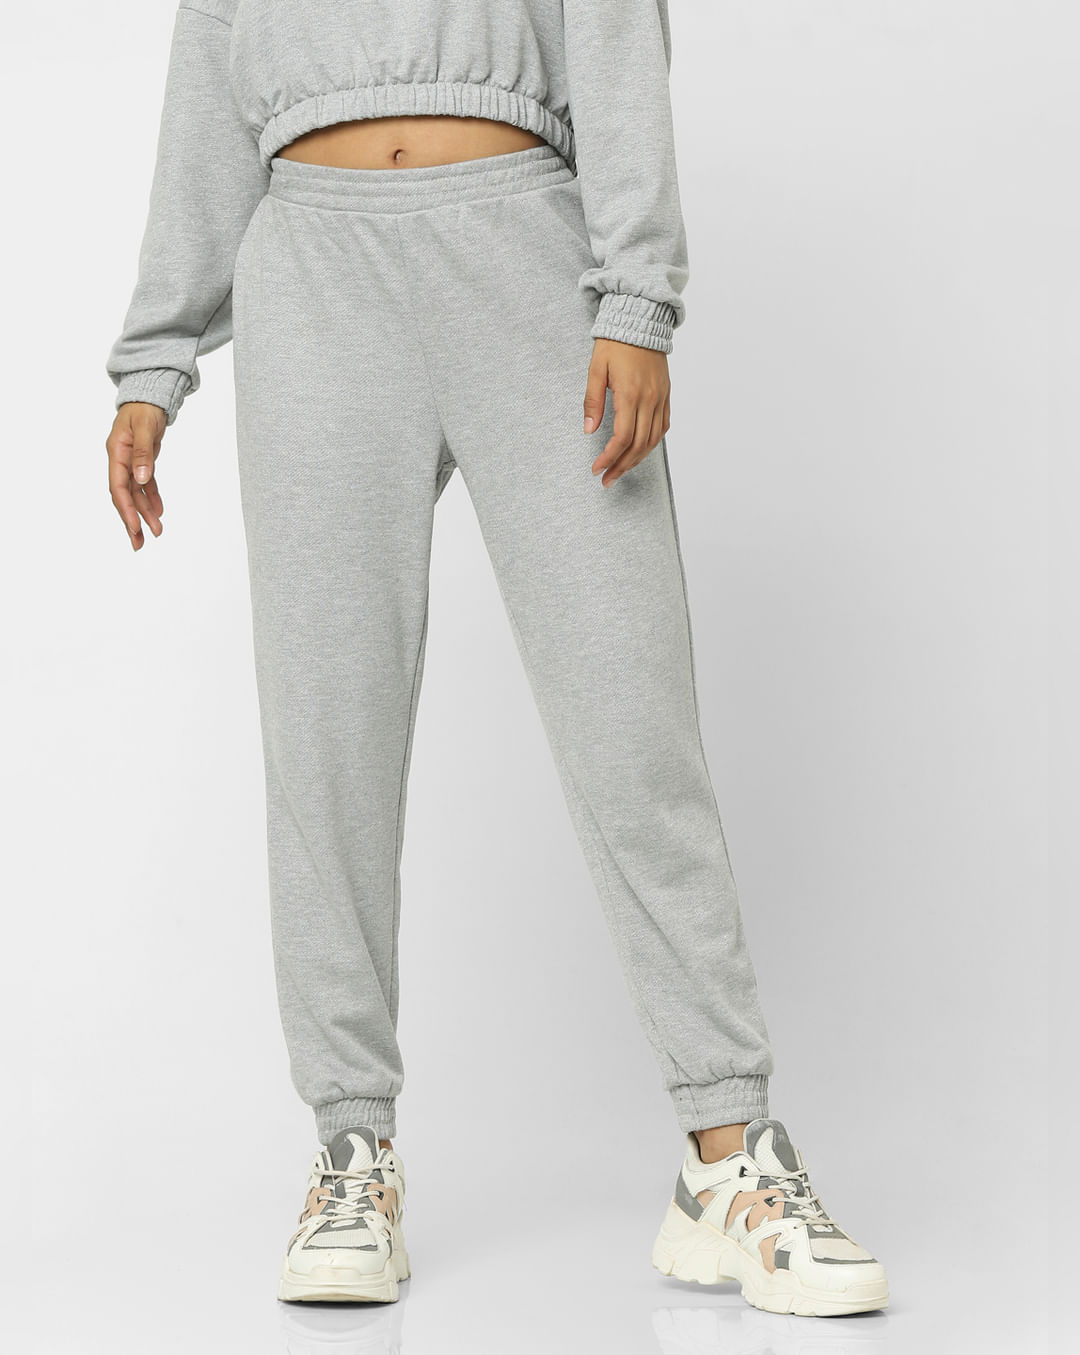 grey+pink smiley jogger style sweatpants